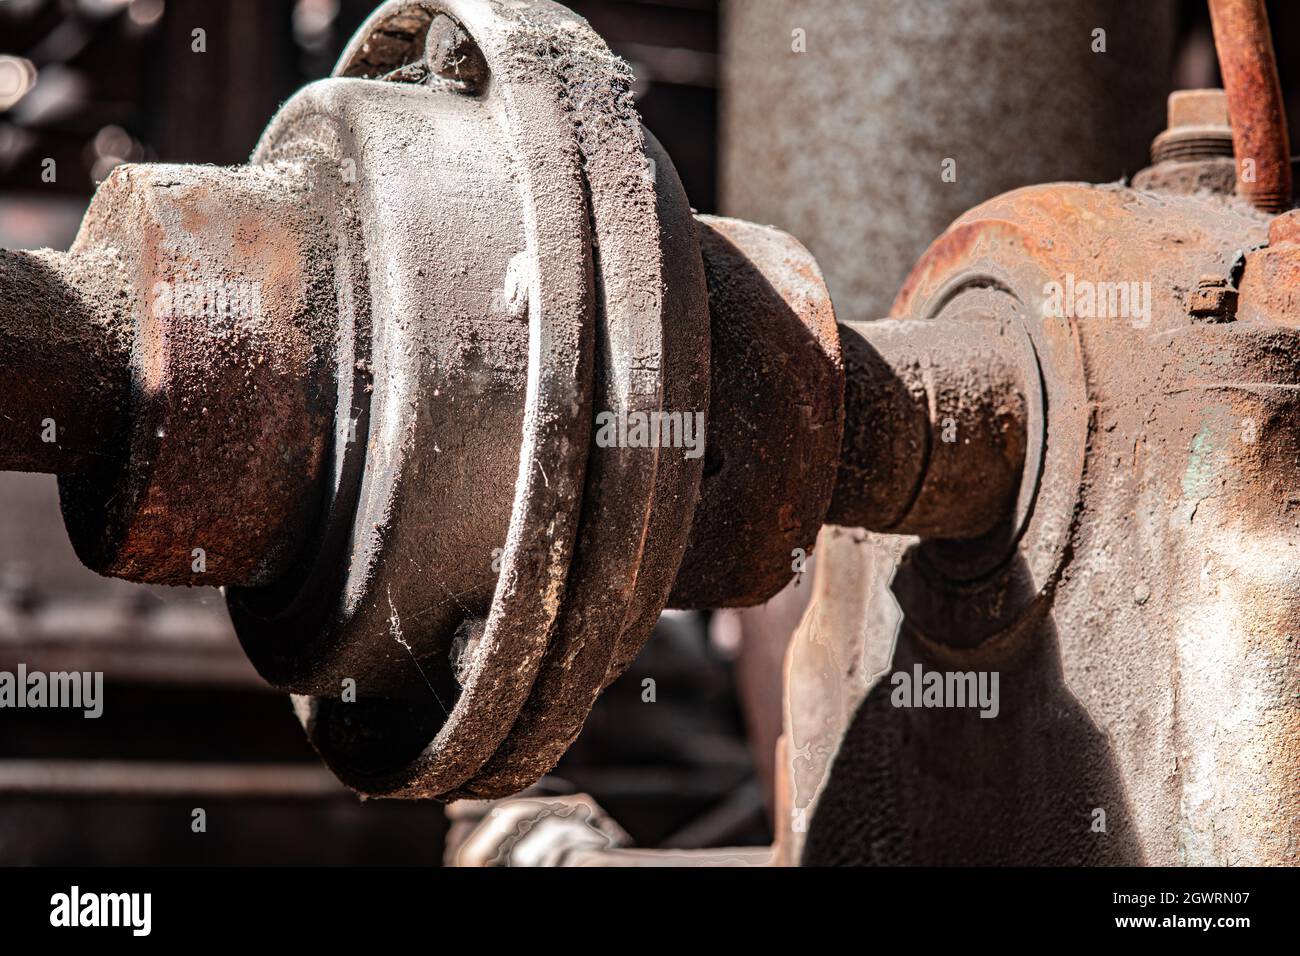 Machinery in an old factory. Stock Photo